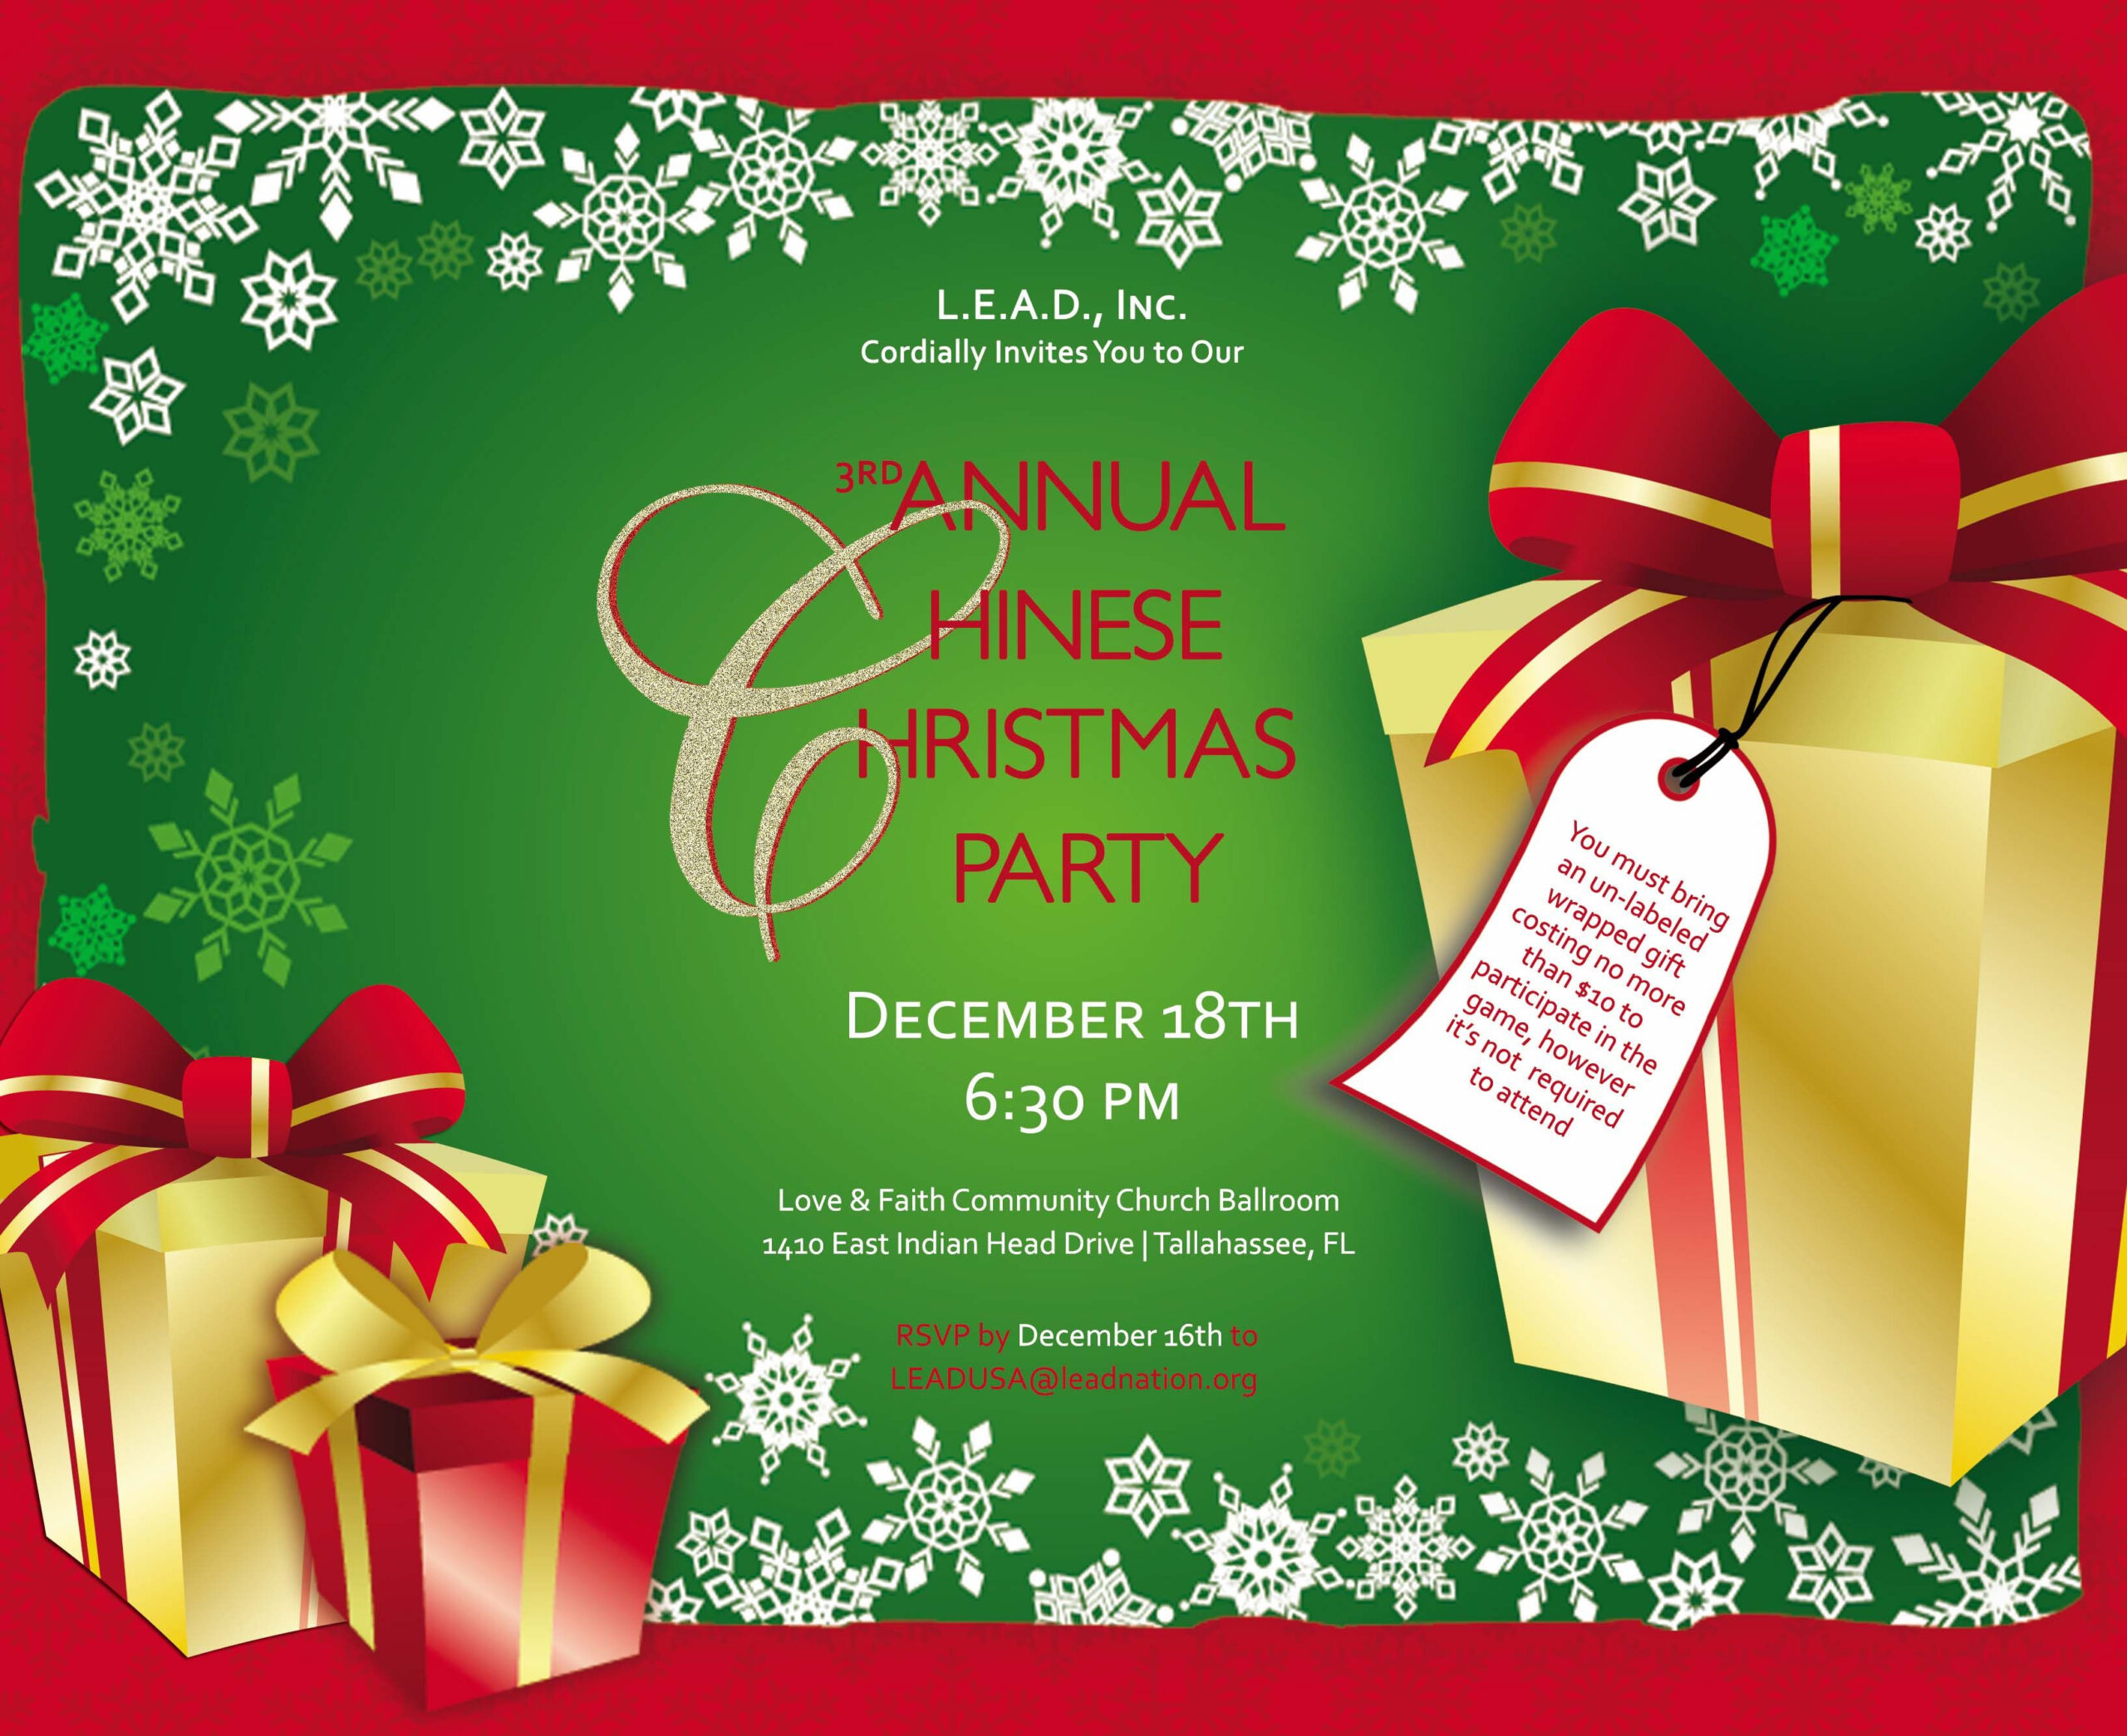 Sample PowerPoint Christmas Invitations To Staff Christmas Party 